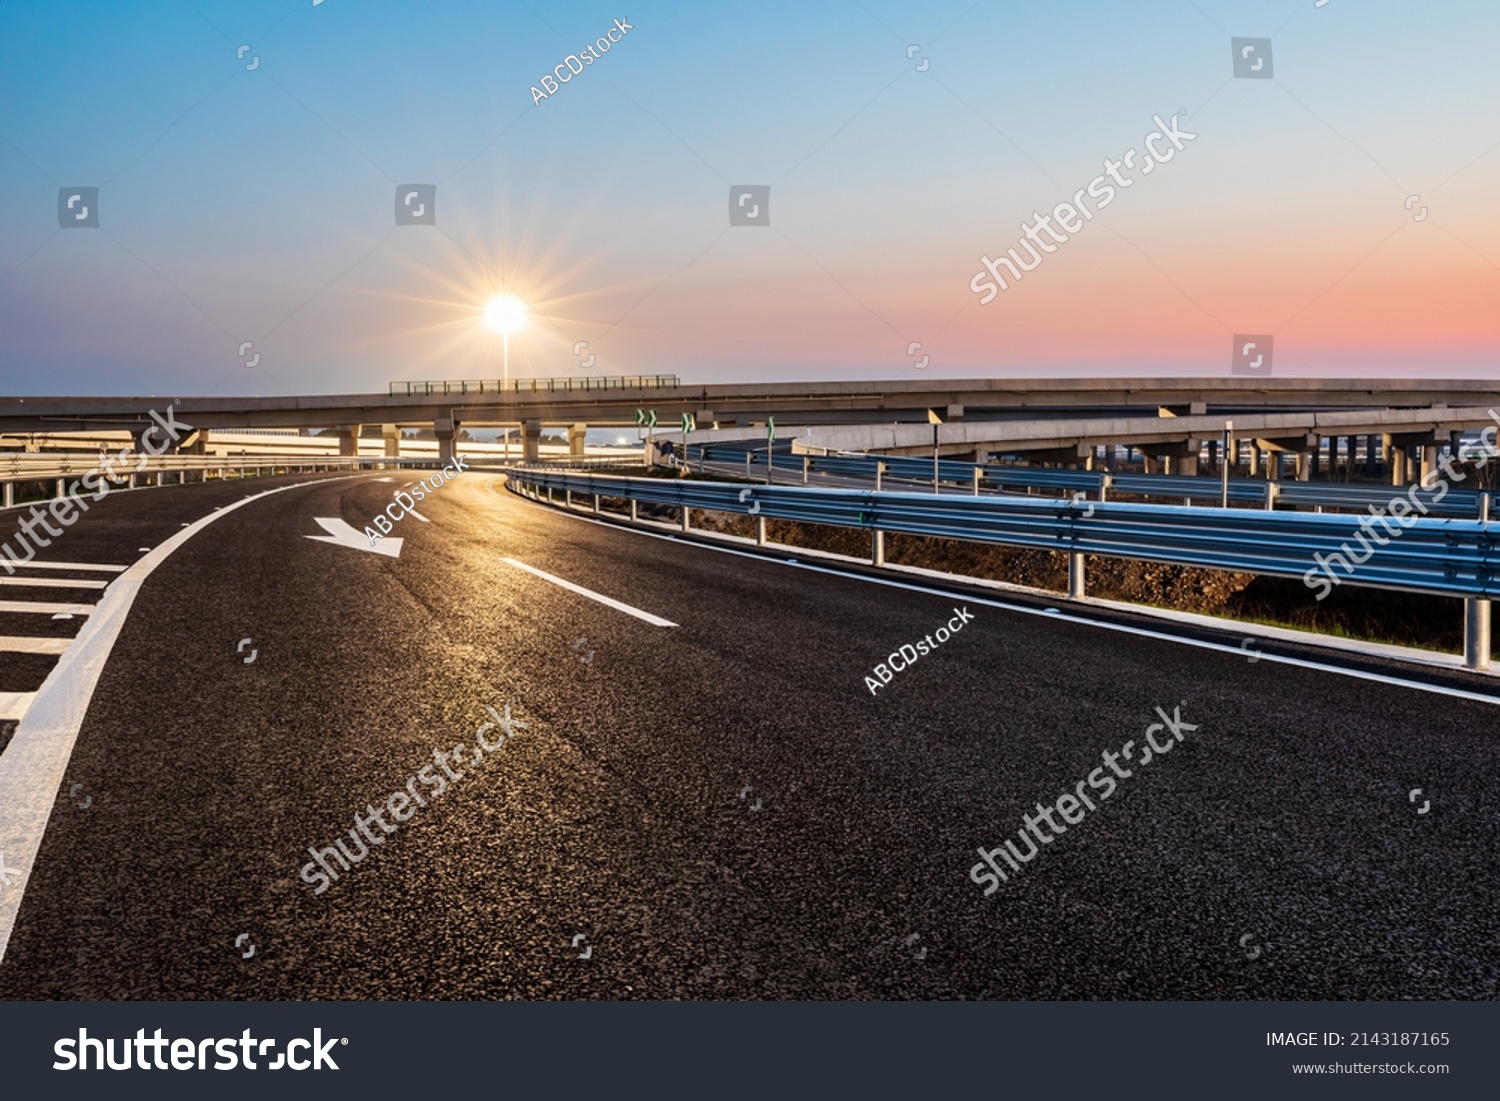 Empty asphalt highway and street lights with beautiful sky at sunset #2143187165